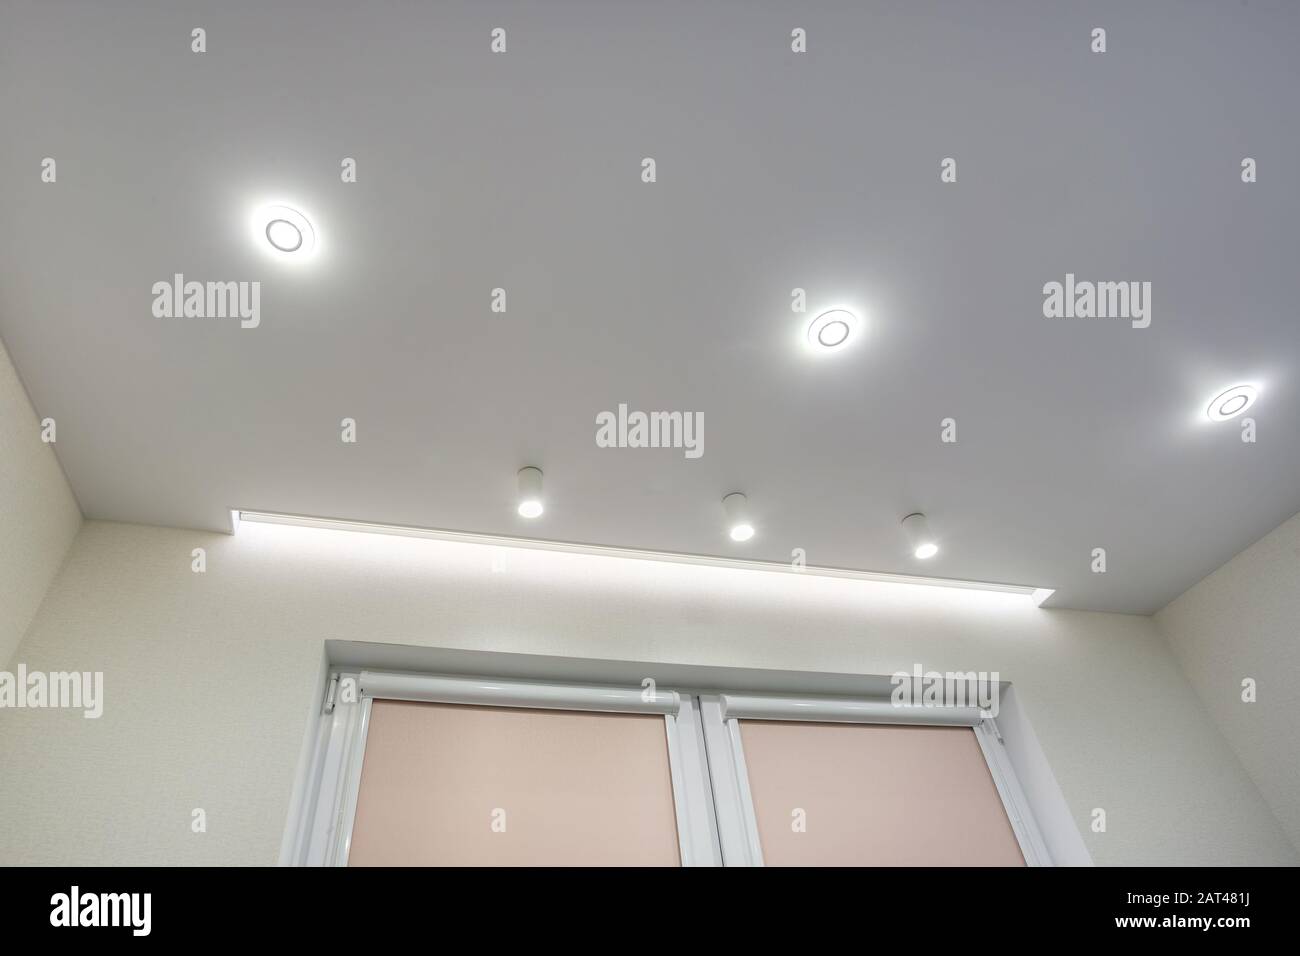 halogen spots lamps on suspended ceiling and drywall construction in in  empty room in apartment or house. Stretch ceiling white and complex shape  Stock Photo - Alamy